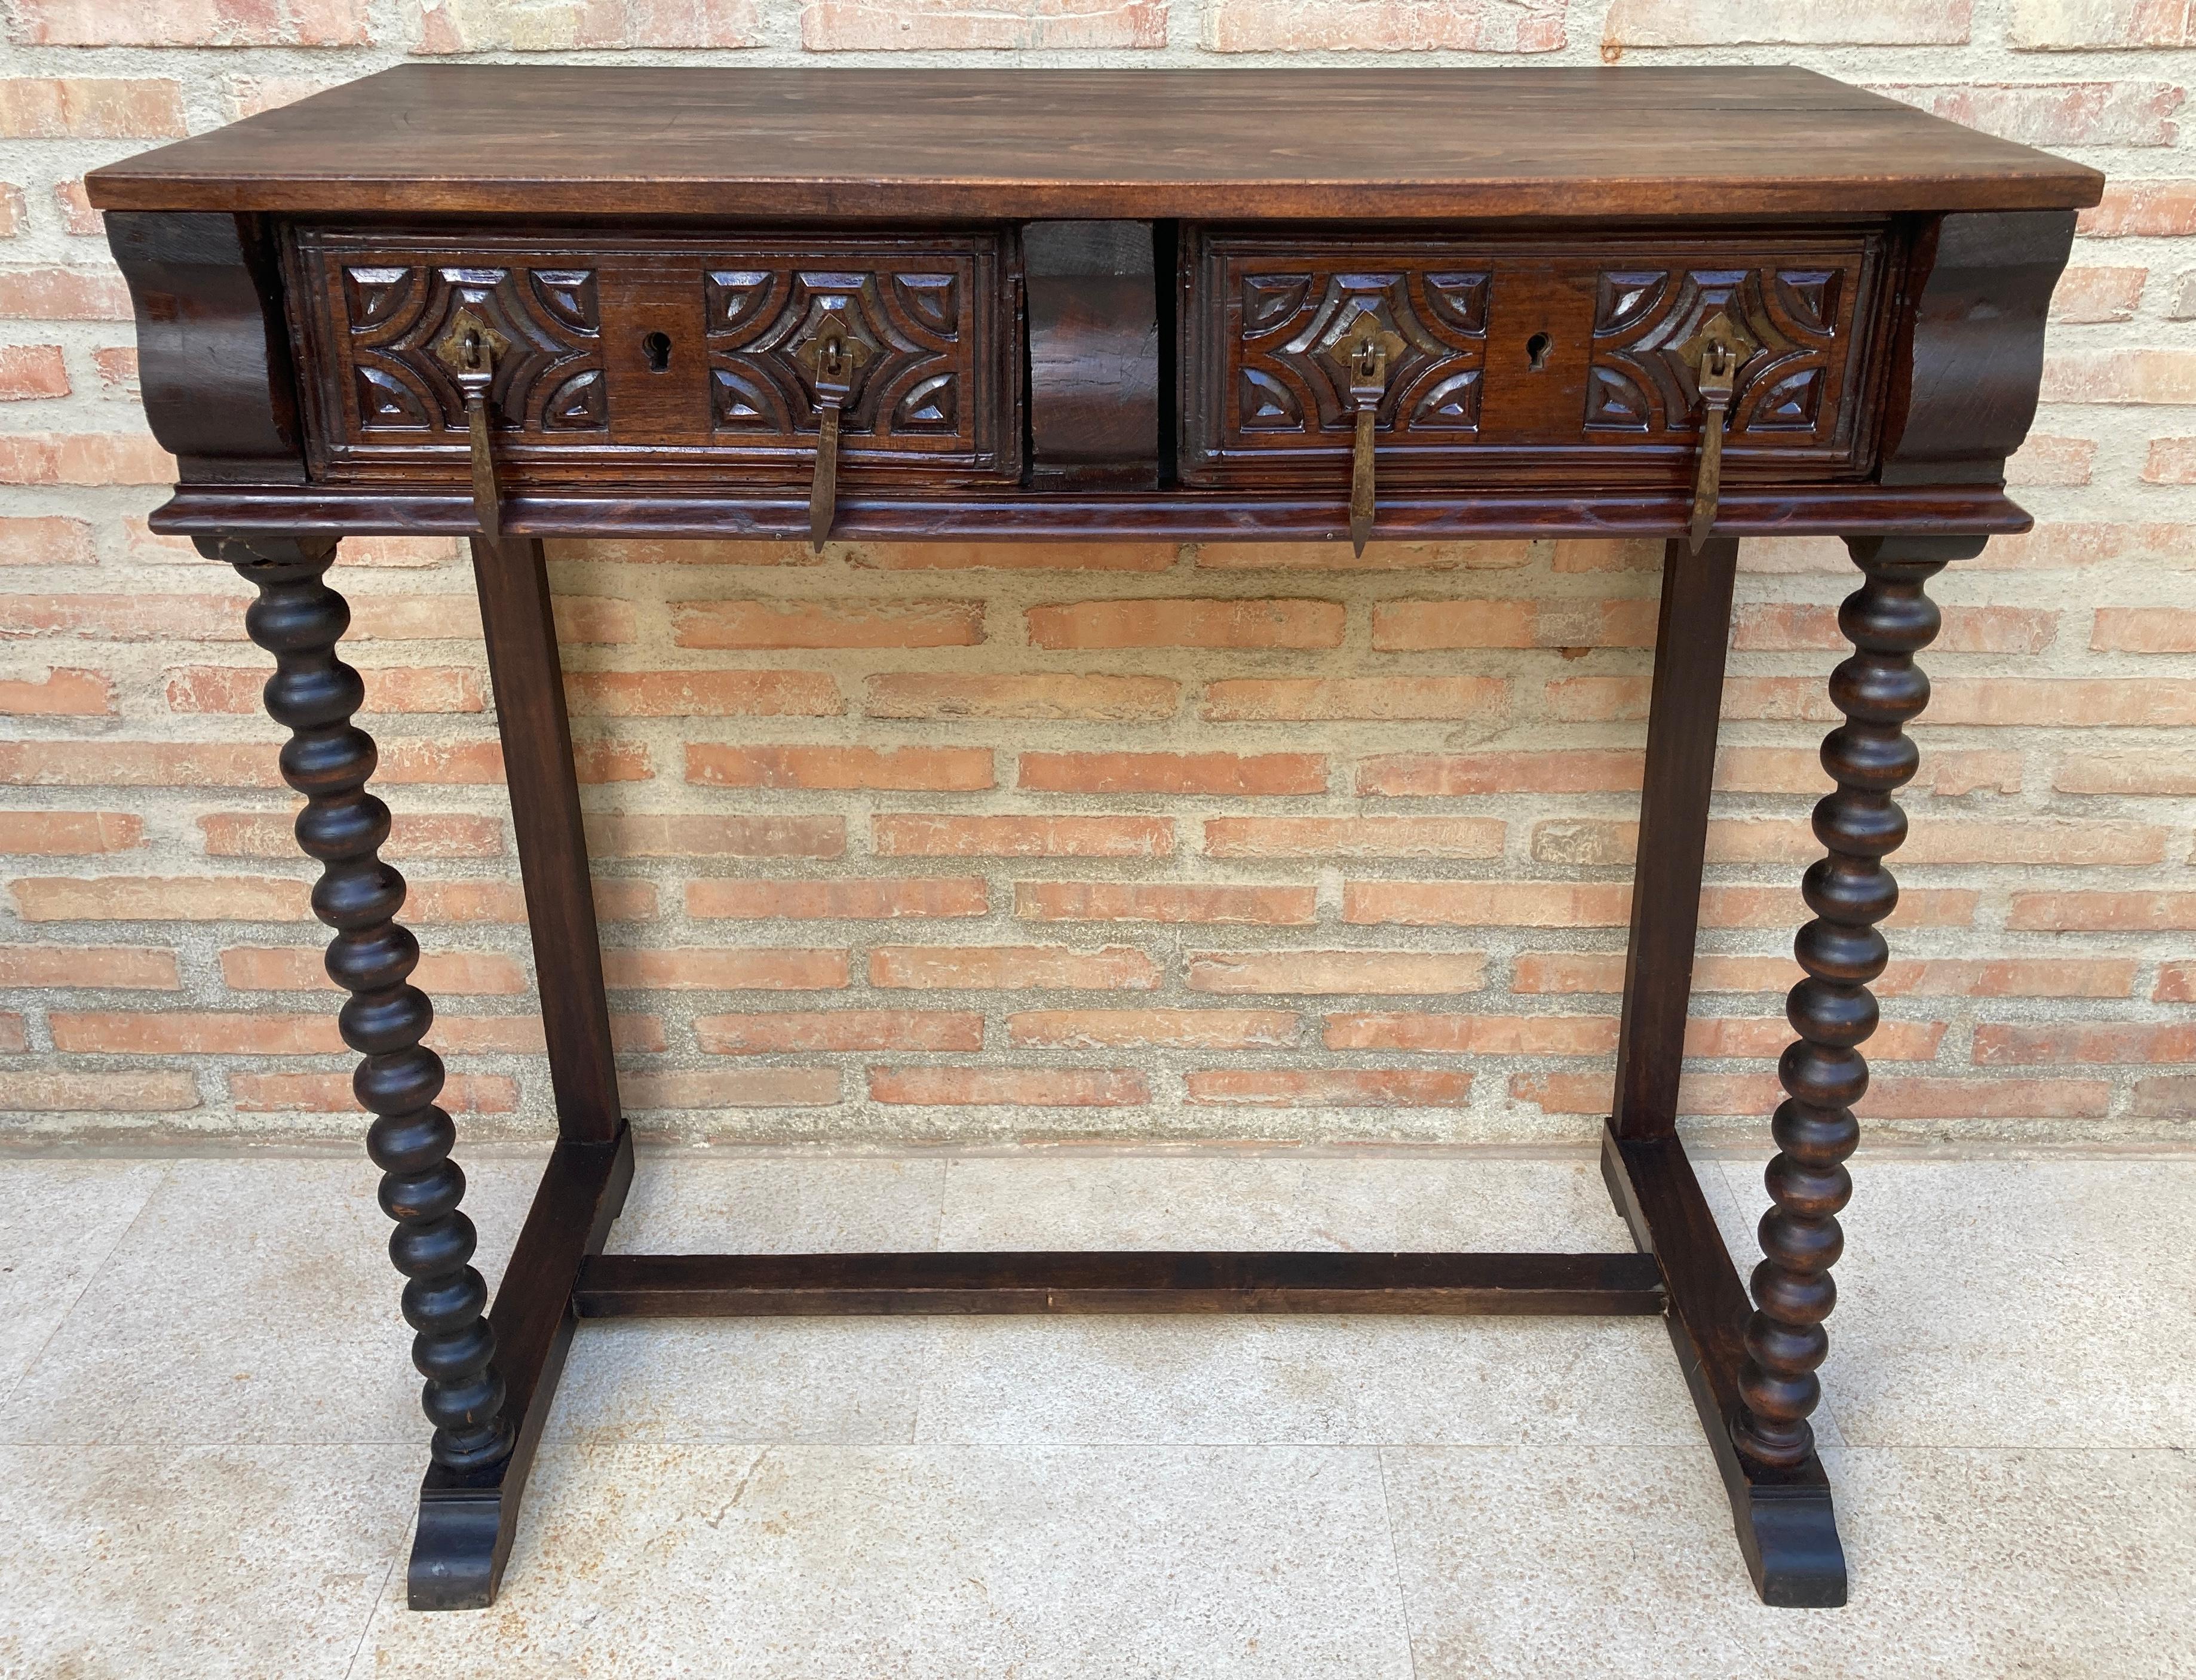 Baroque Spanish Console or Desk Table with Drawers and Solomonic Legs